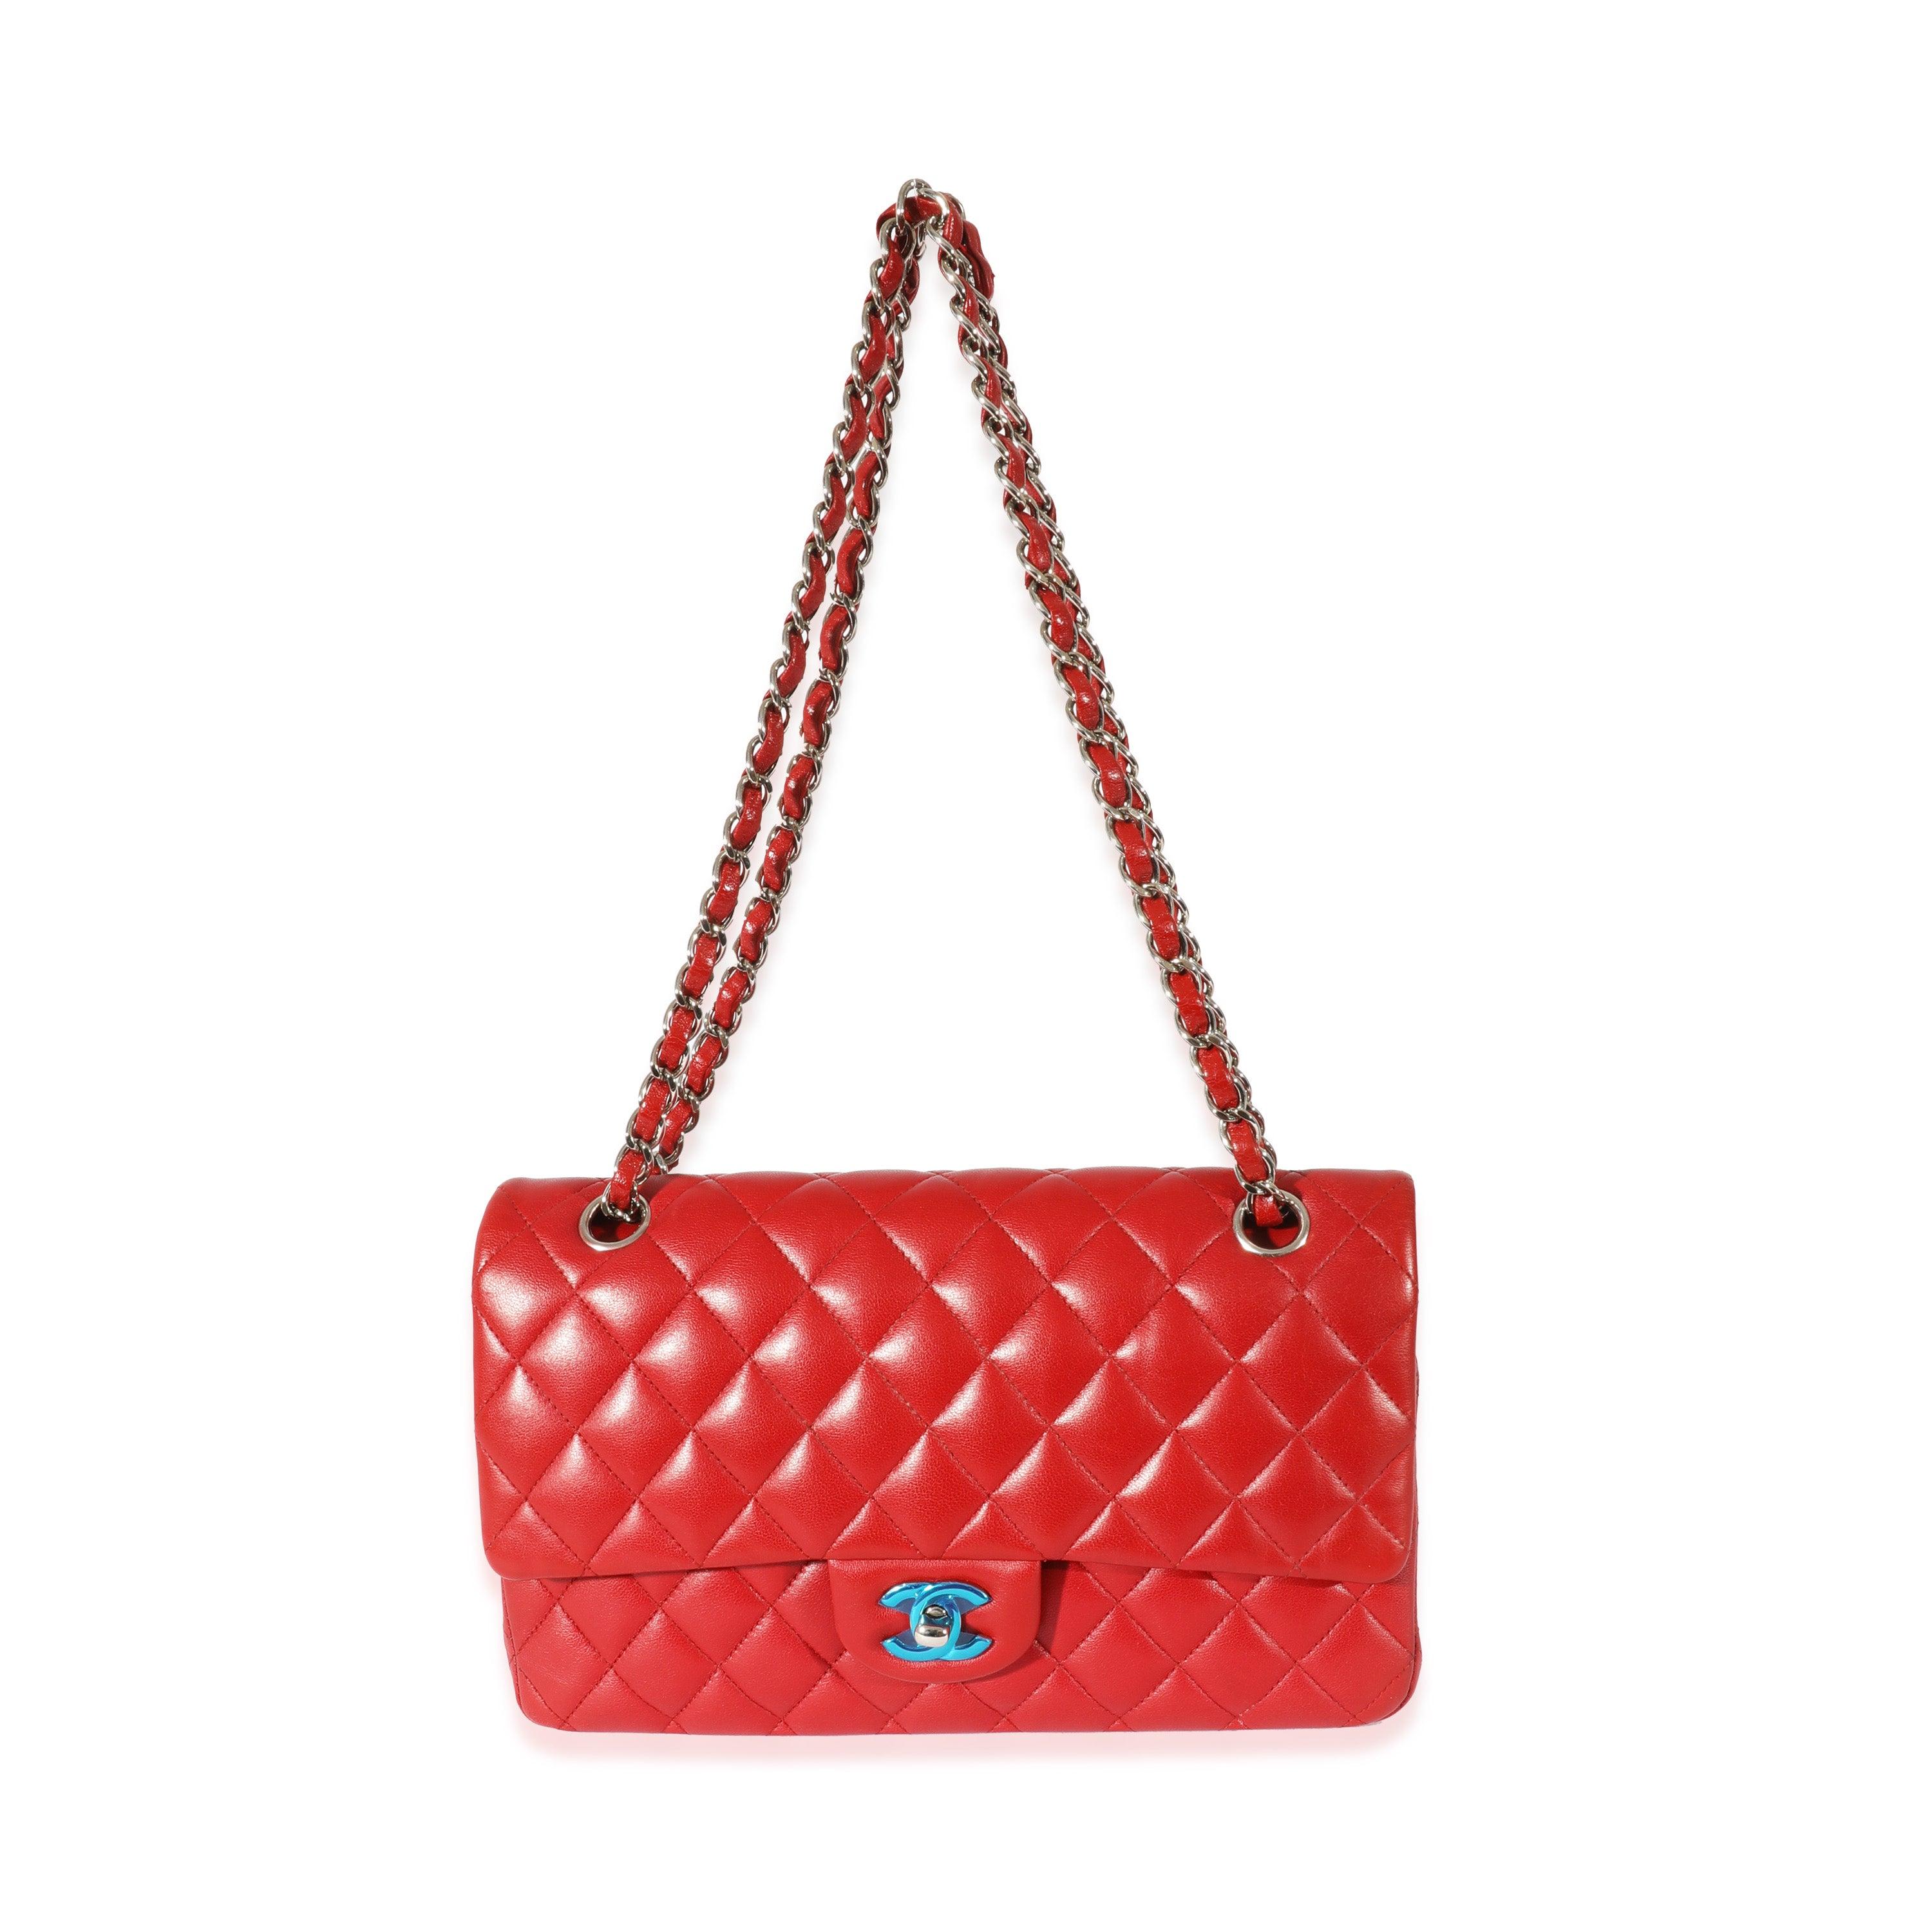 Chanel Red Quilted Lambskin Medium Classic Double Flap Bag

A timeless classic that never goes out of style, the flap bag from Chanel dates back to 1955 and has seen a number of updates. The design was revolutionary for its time, giving its wearers